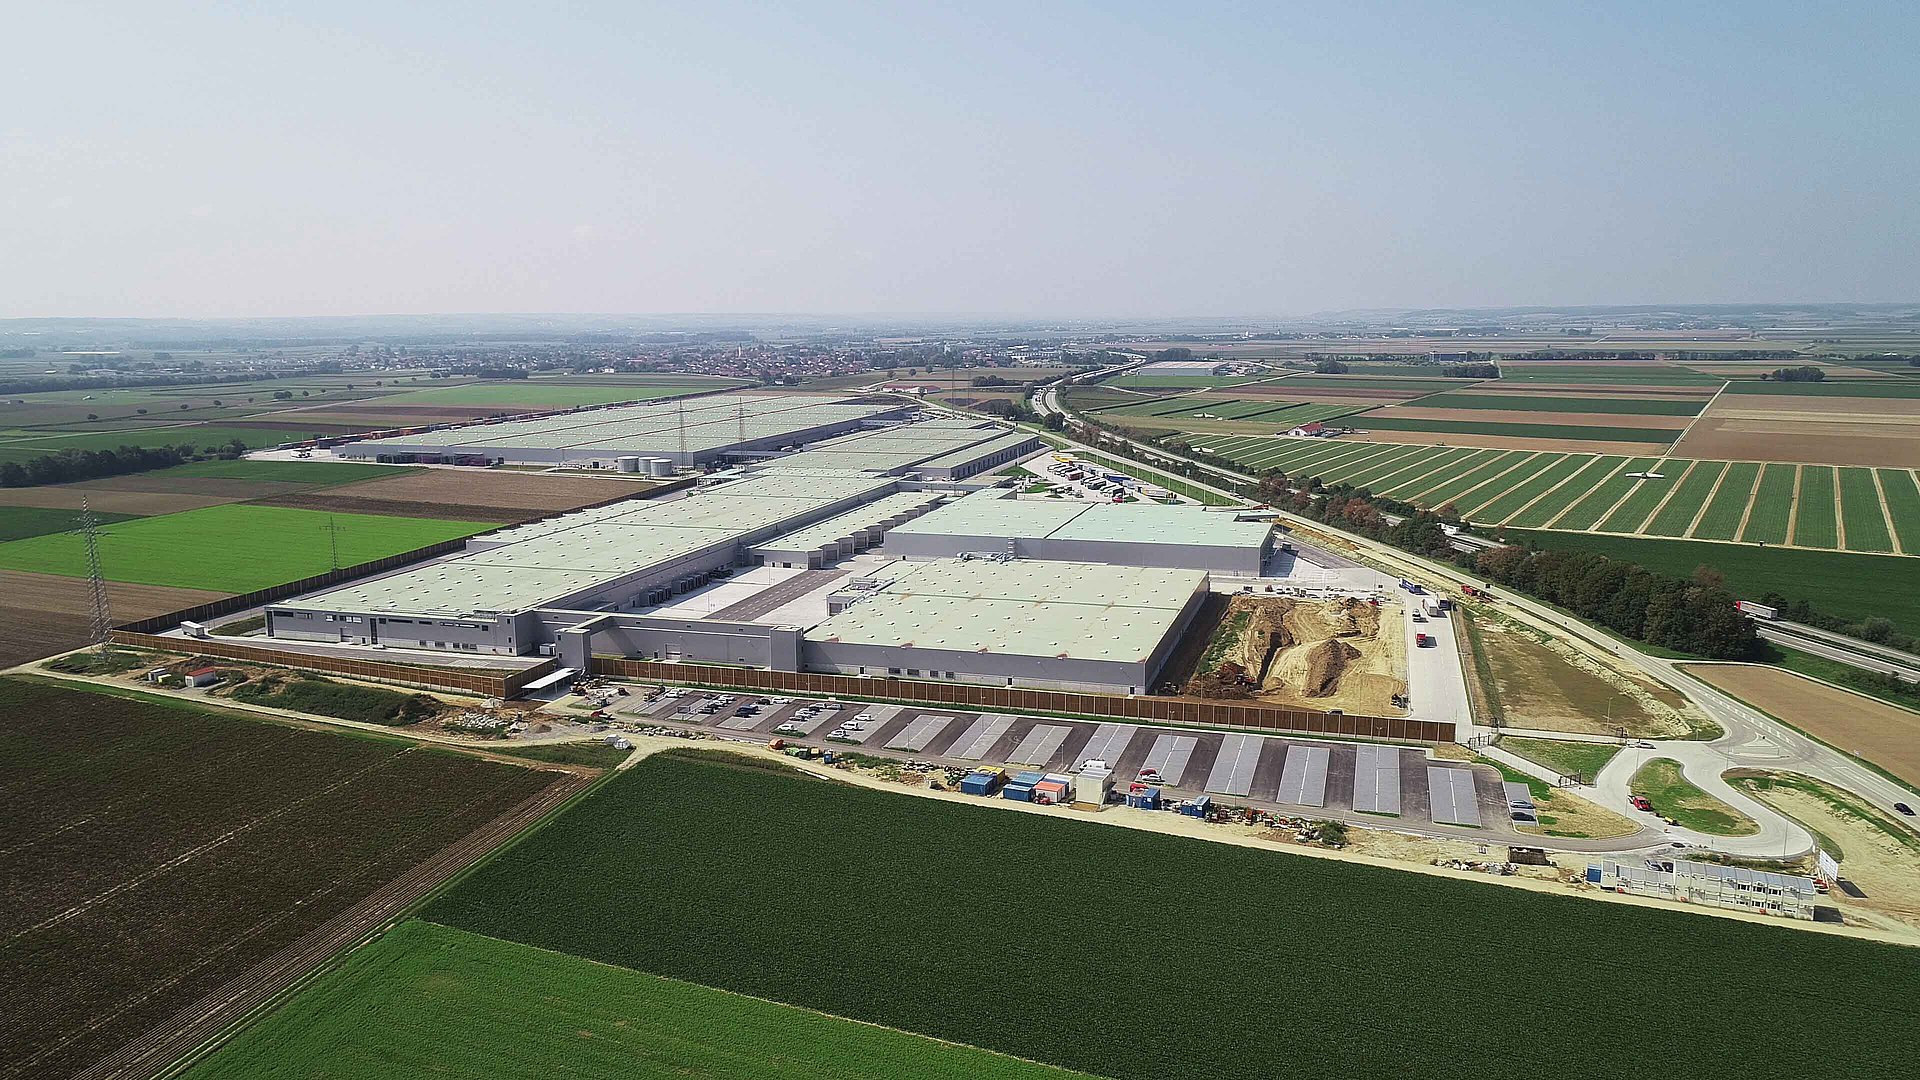 Birds-eye view of the BMW logistics centre in Wallersdorf